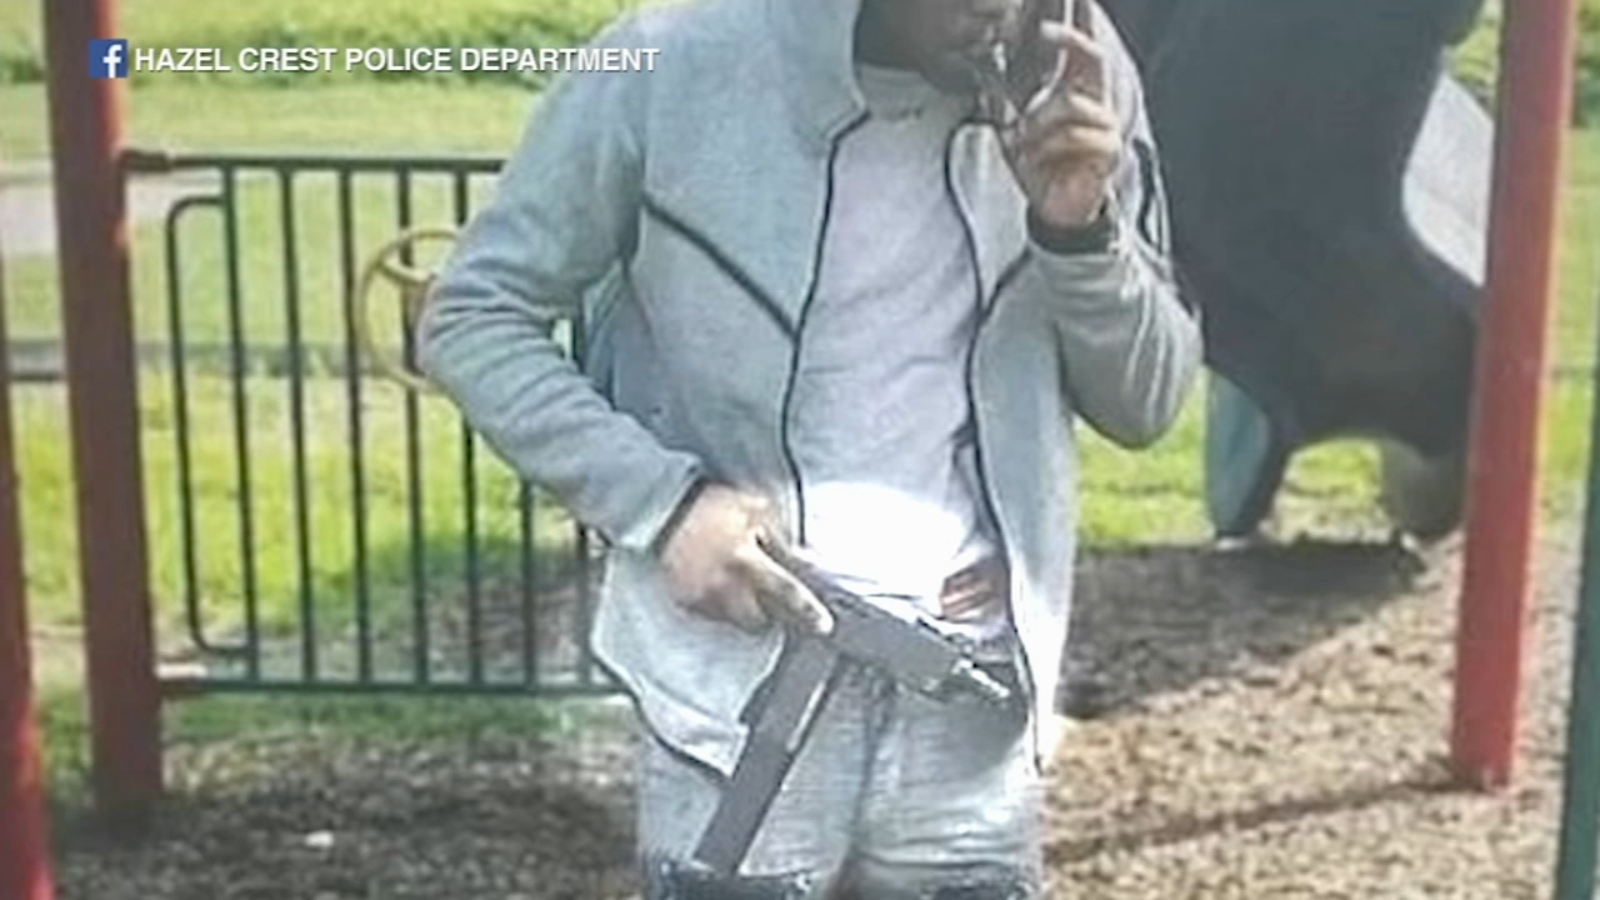  Hazel Crest police looking for men seen on video at playground with guns 